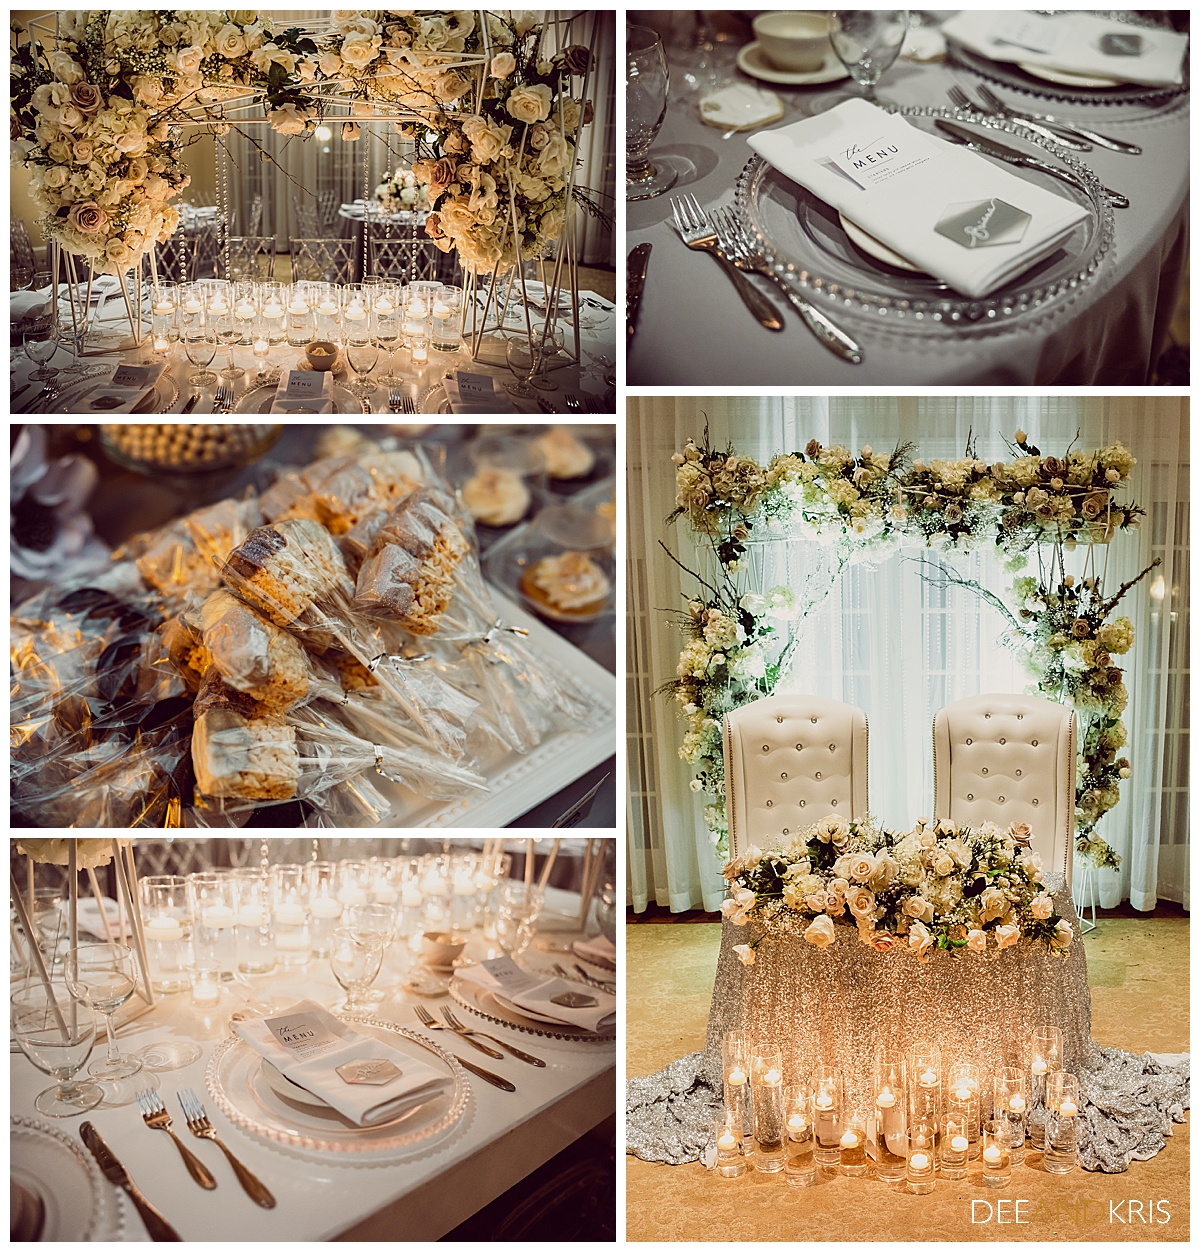 Five images: Top left image of table setting lit up and flanked in flowers. Left center image of s'more pop favors. Bottom left image of table setting litl of with twinkle lights, Top right image of charger and menu table setting. Bottom right image sweetheart's table.